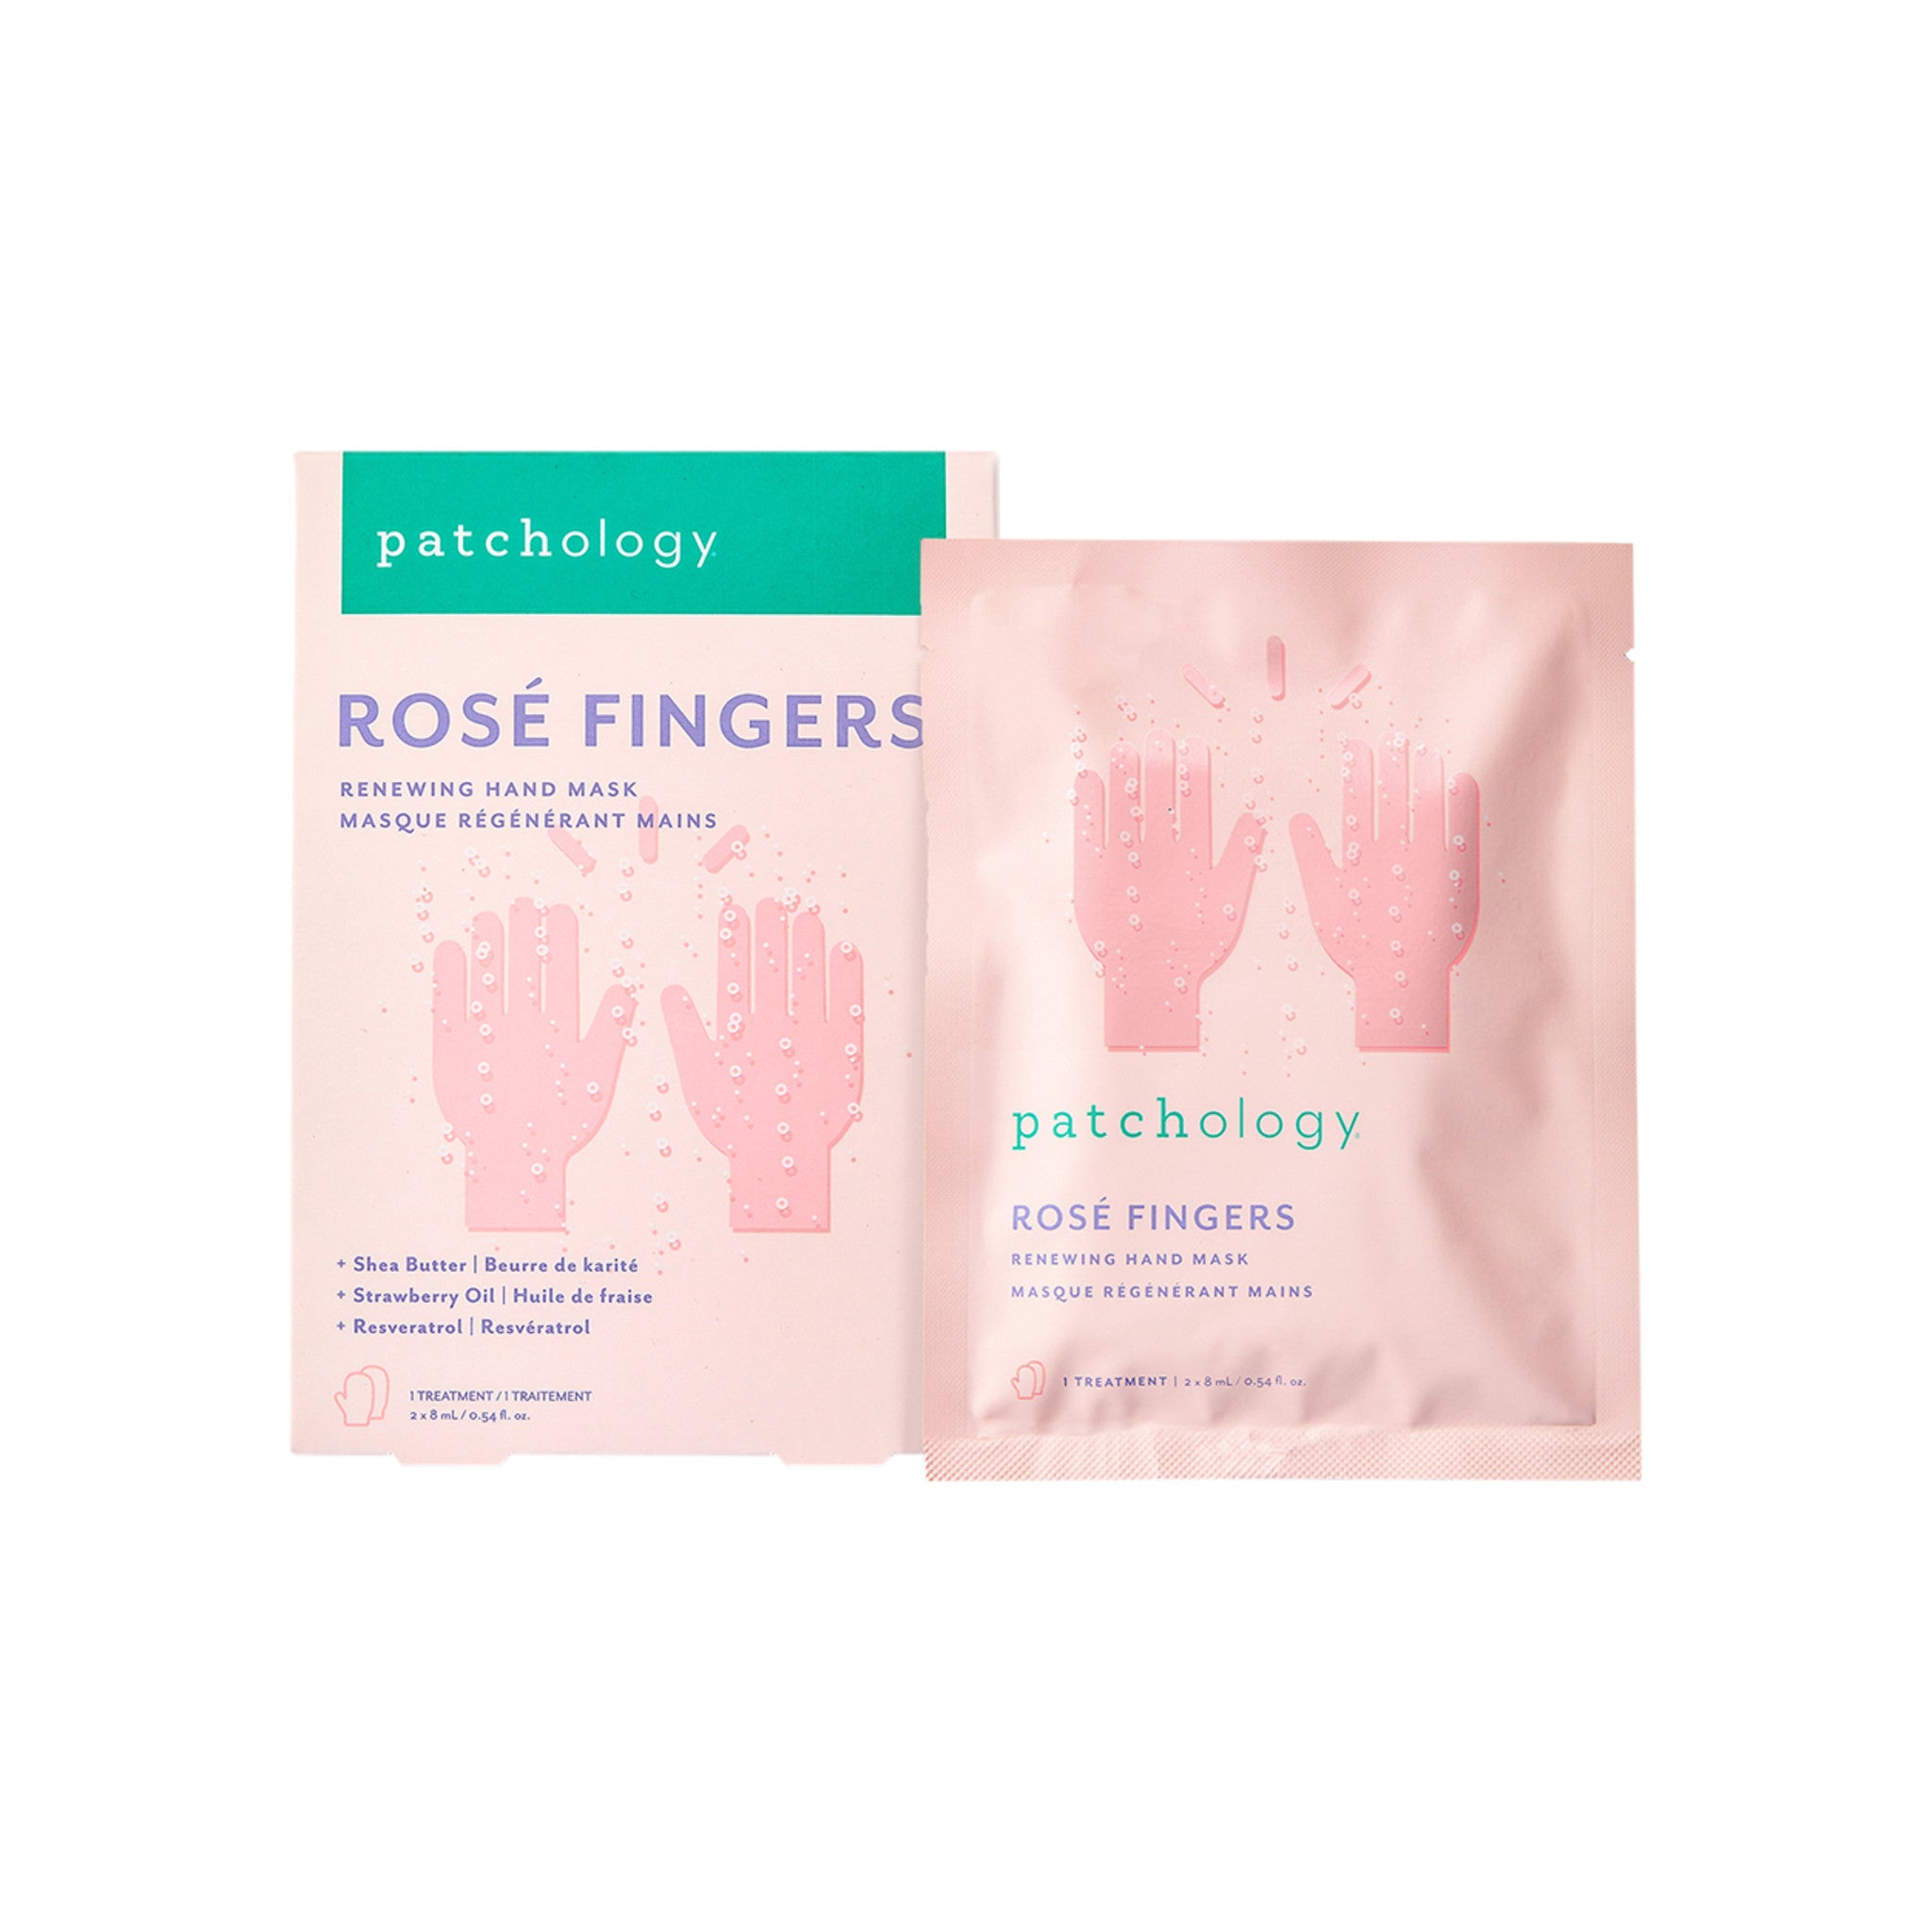 Patchology Rosé Fingers Hydrating and Anti-Aging Hand Mask main image.